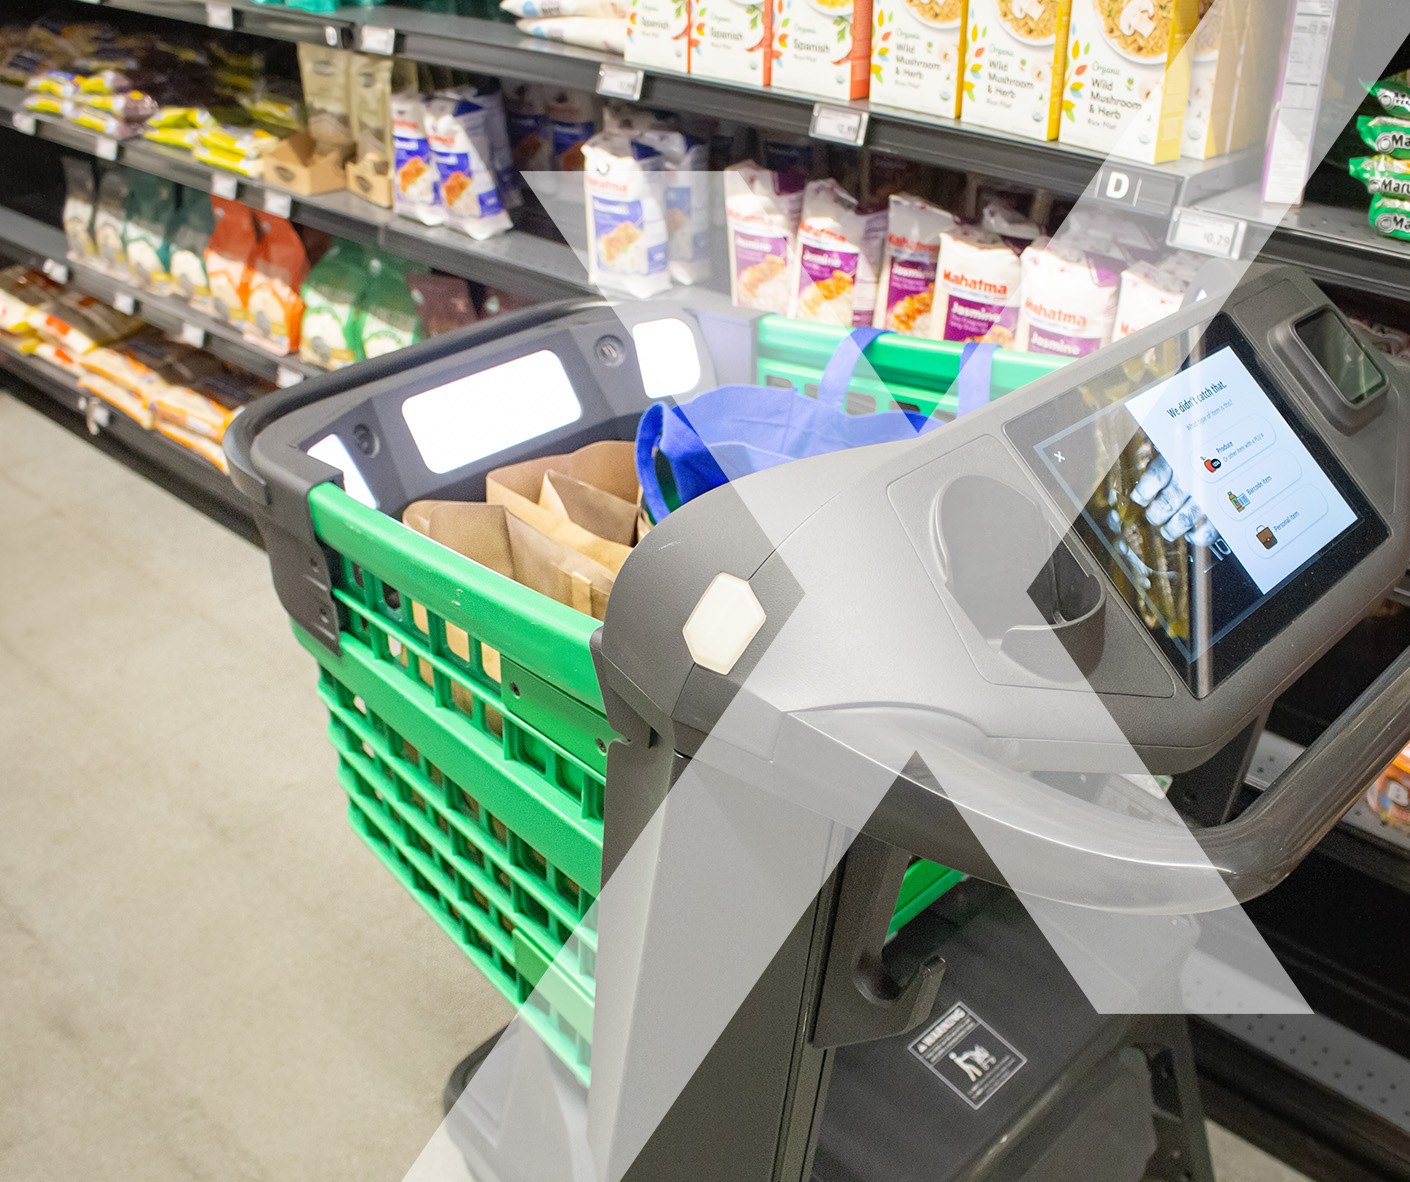 Featured image for “Frictionless Shopping, Delivery Robots and Online Fulfillment Shaping Grocery Retail Trends”